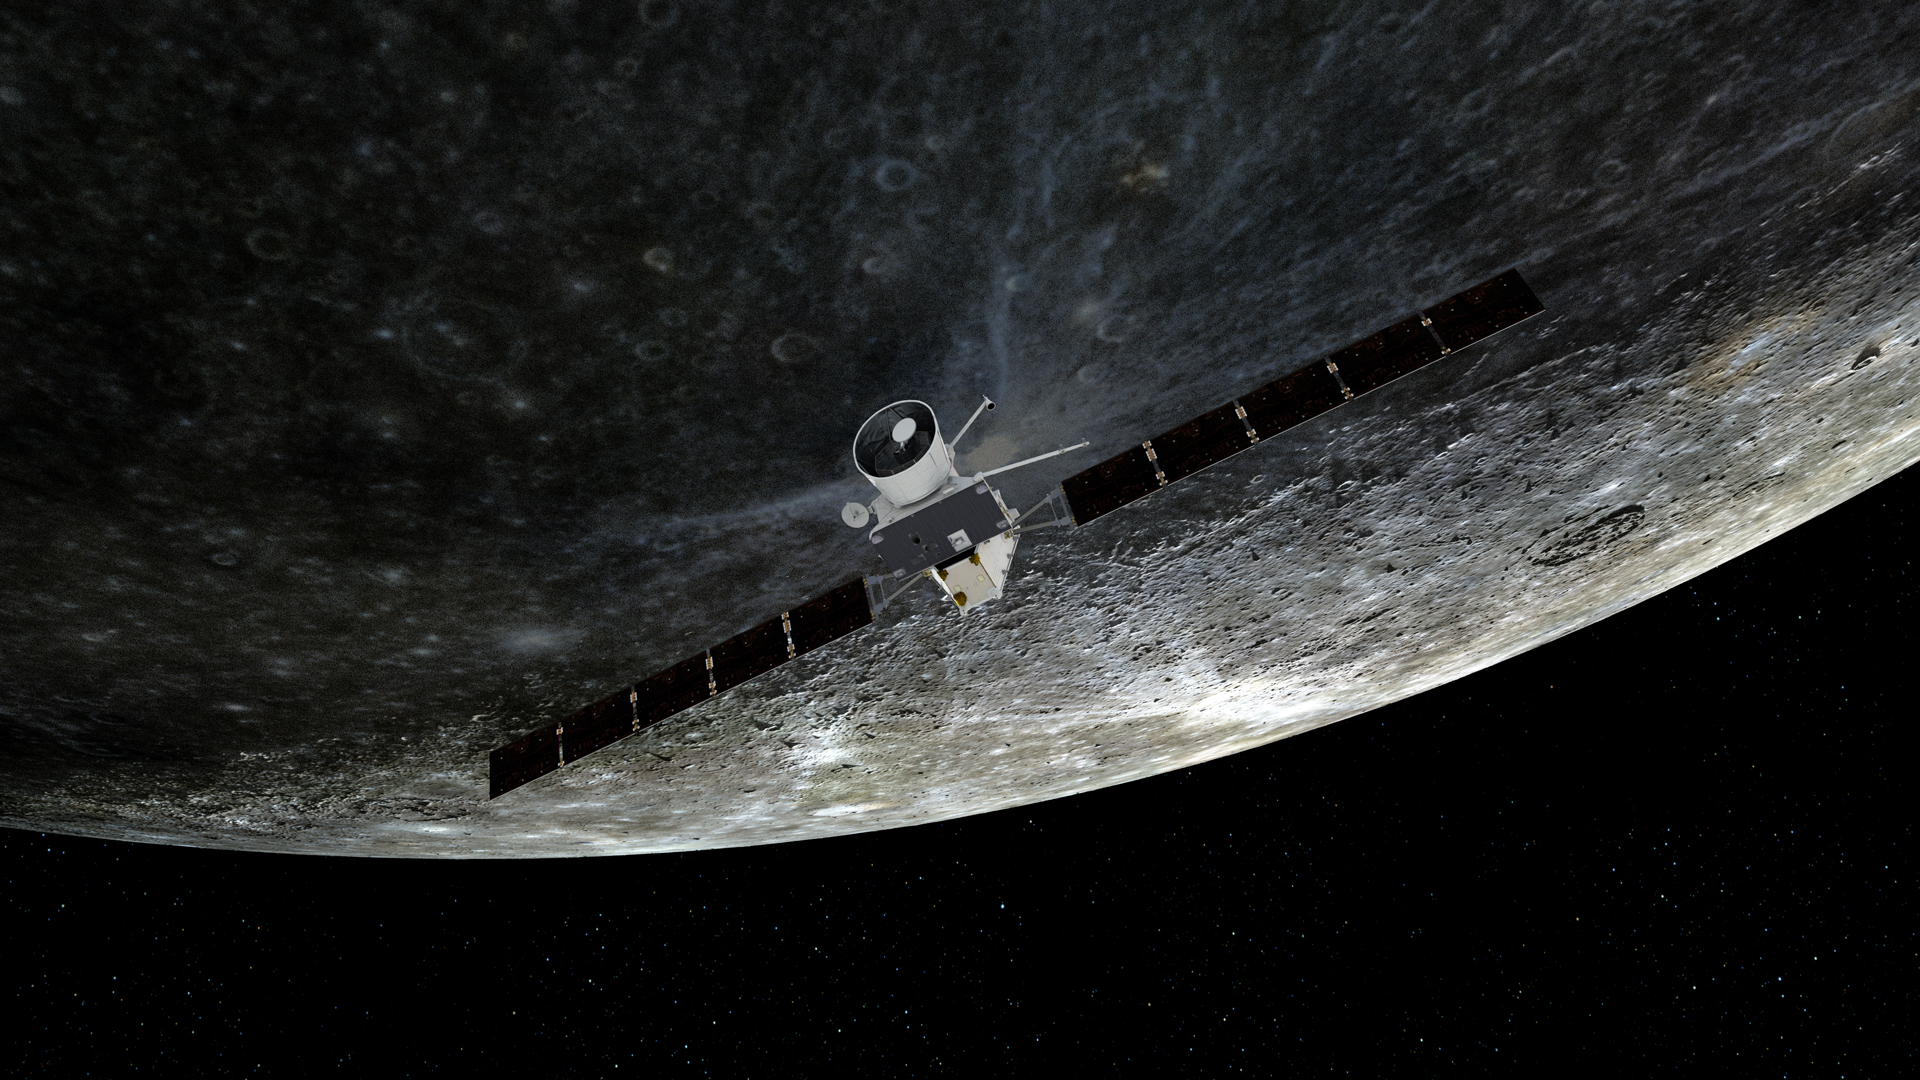 The European/Japanese probe BepiColombo made its second flyby of Mercury on June 23, 2022.